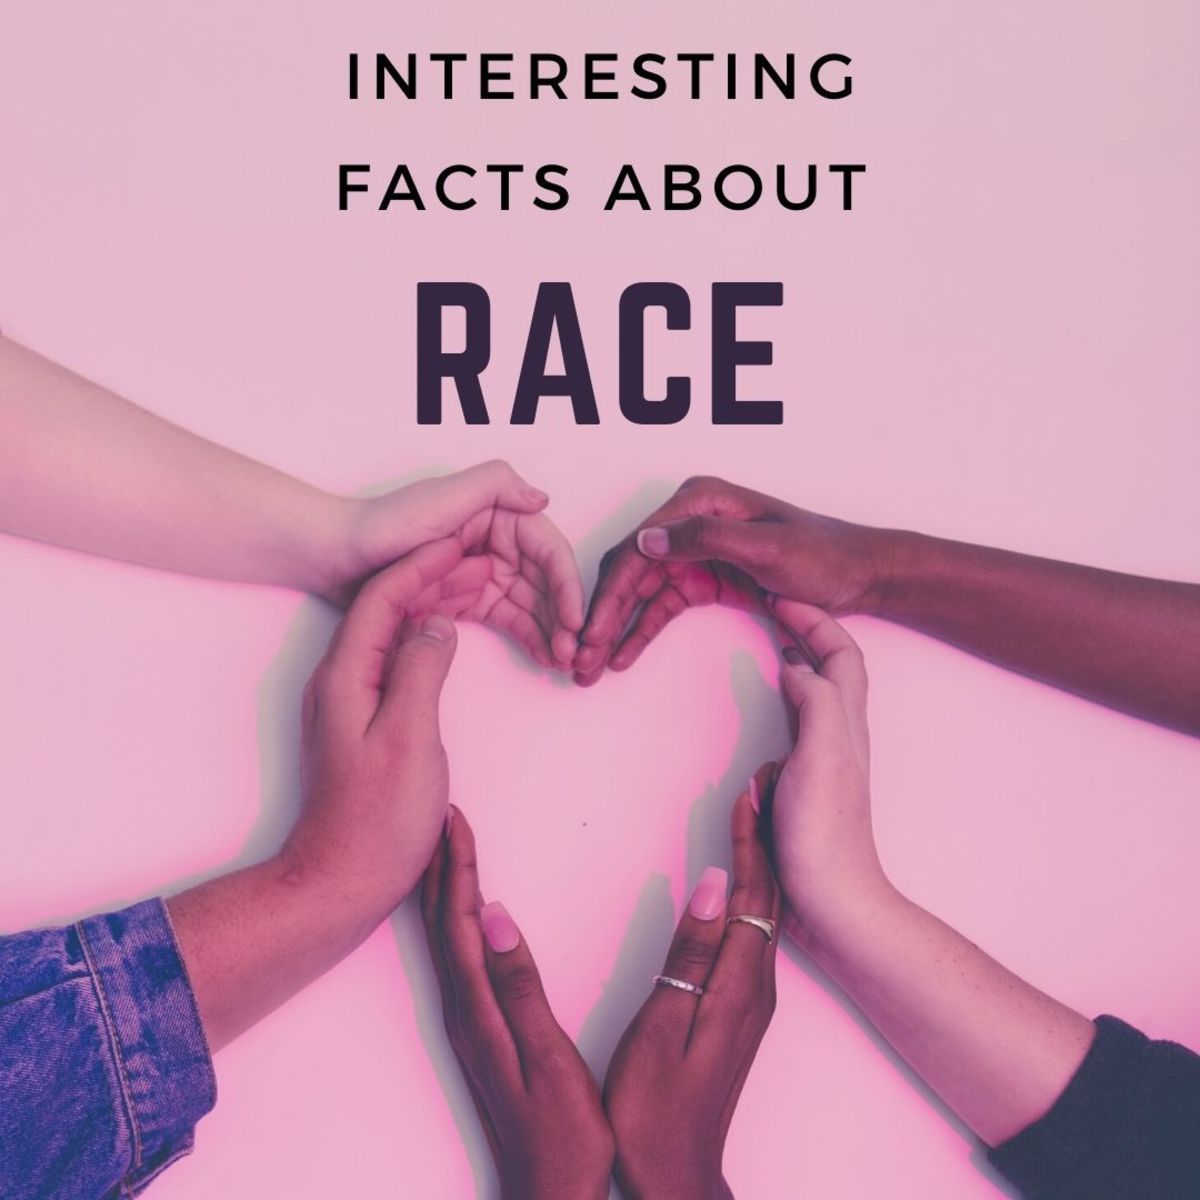 Here are some facts you may or may not know about race.